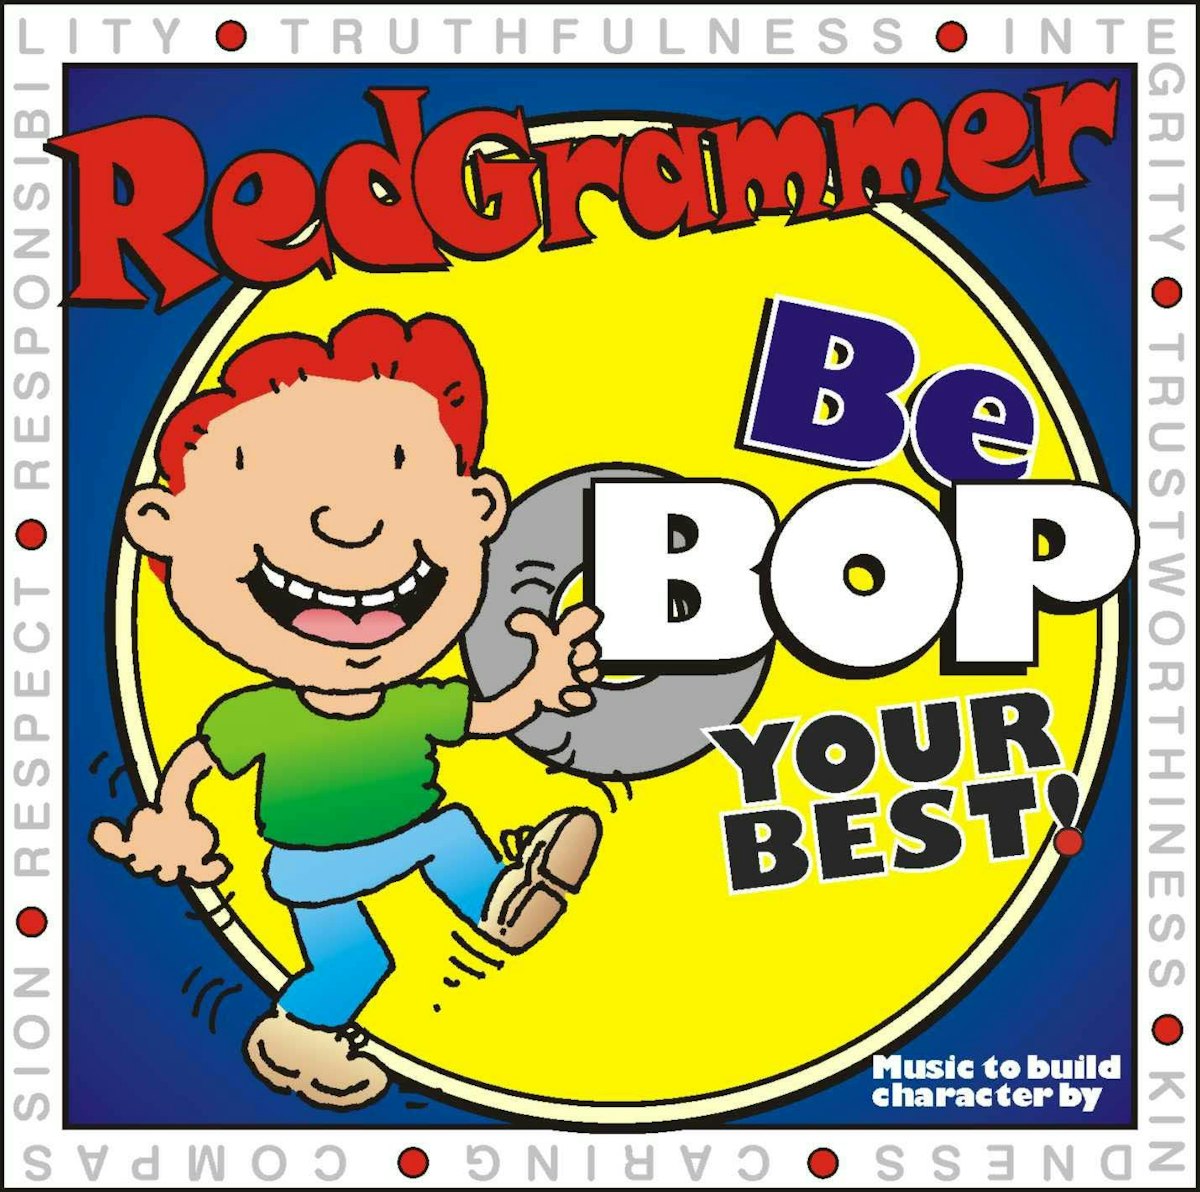 The cover to Red Grammer's Grammy nominated album, BeBop Your Best.